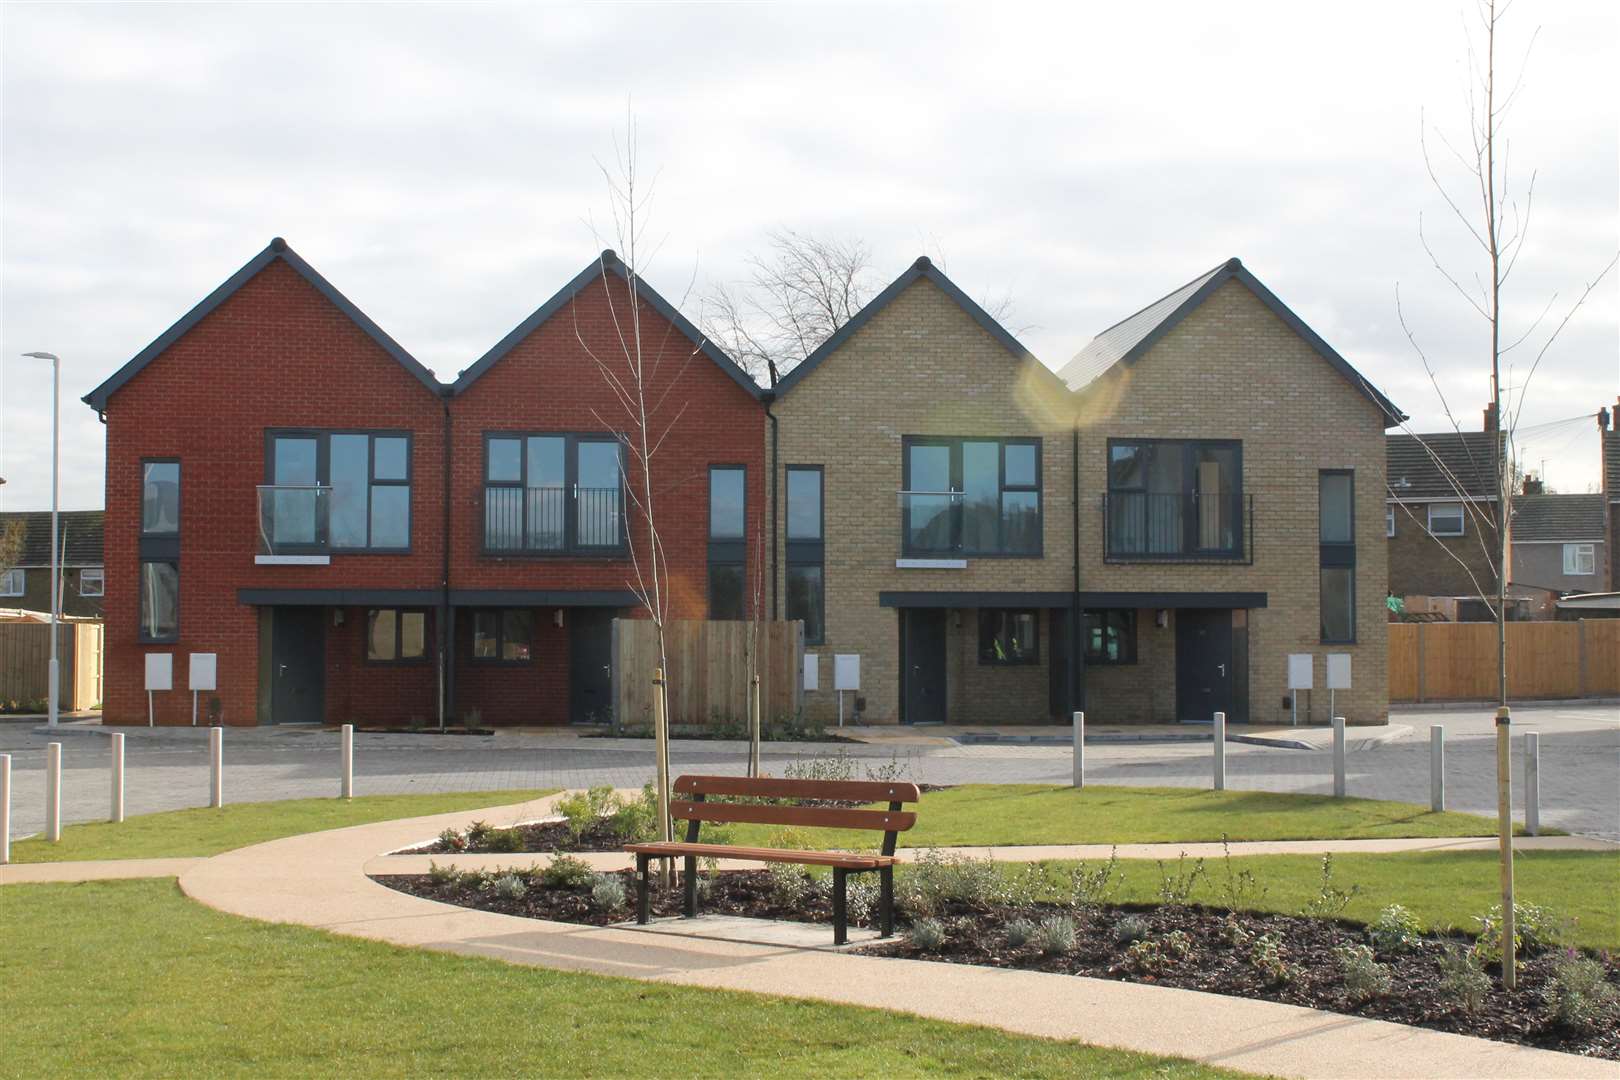 Wild Ash Croft, built by housing association Optivo and Chartway developers